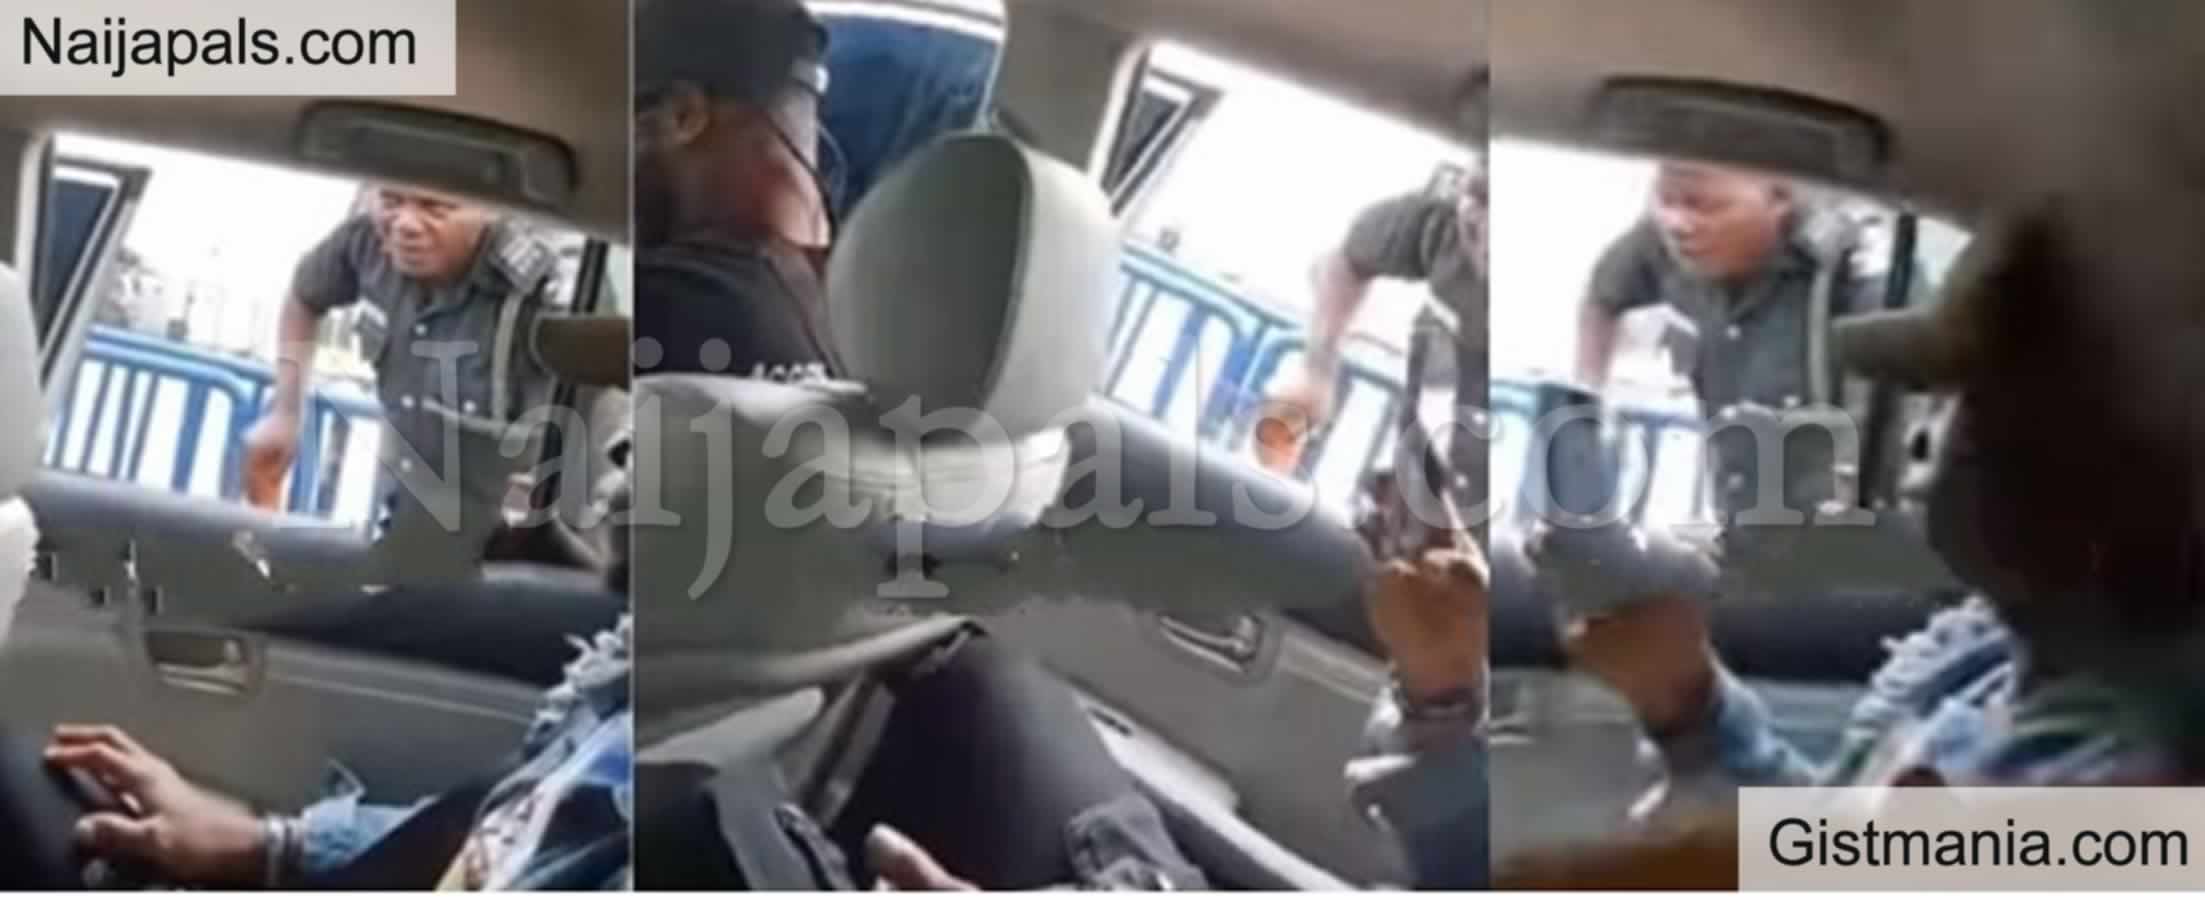 <img alt='.' class='lazyload' data-src='https://img.gistmania.com/emot/news.gif' /><B>The Policemen Who Searched A Man's Phone In Lagos Arrested</b>